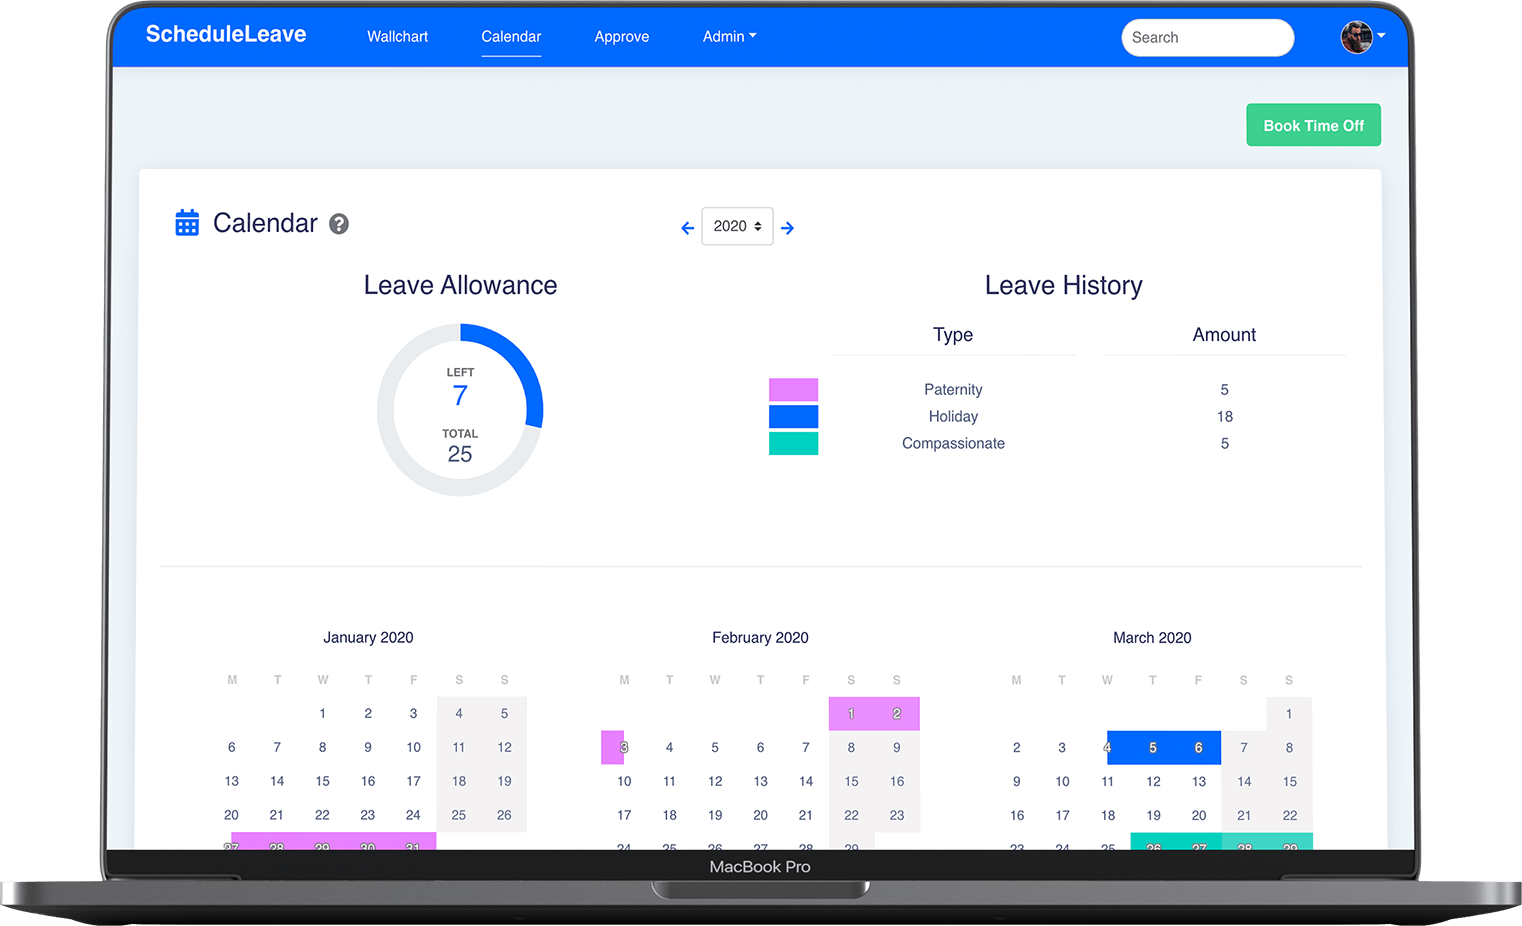 ScheduleLeave - Calendar page to view all holiday booked for the year